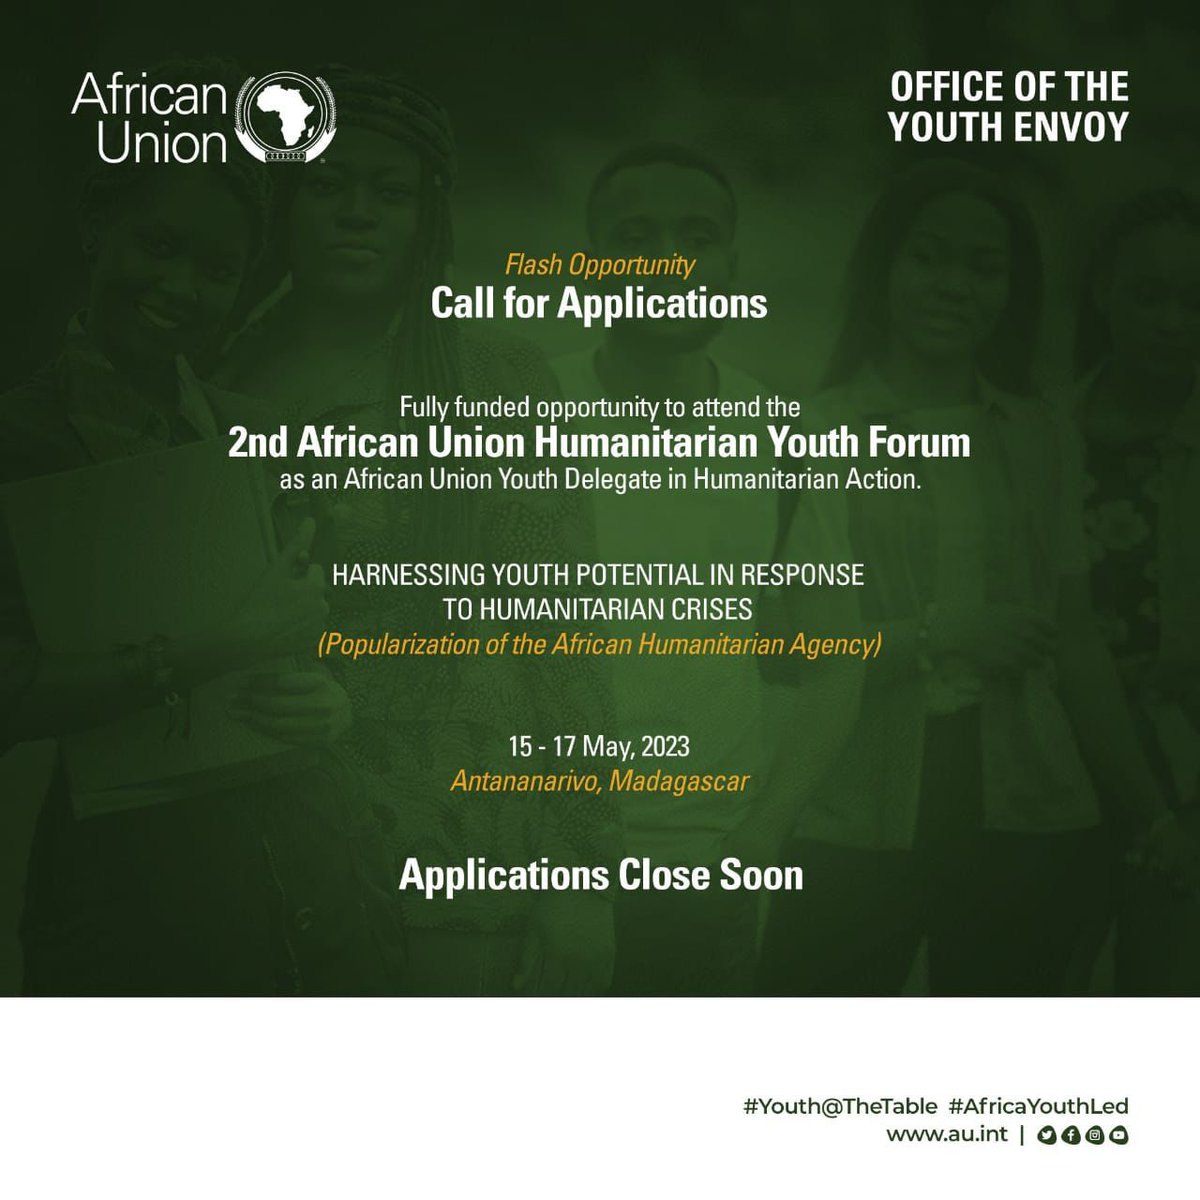 Call for opportunity. 

Great opportunity here for young people. Harnessing Youth Potential in Response To Humanitarian Crisis #AfricaYouthled #YouthatTheTable

Registration link 🔗👇
rb.gy/o0k36